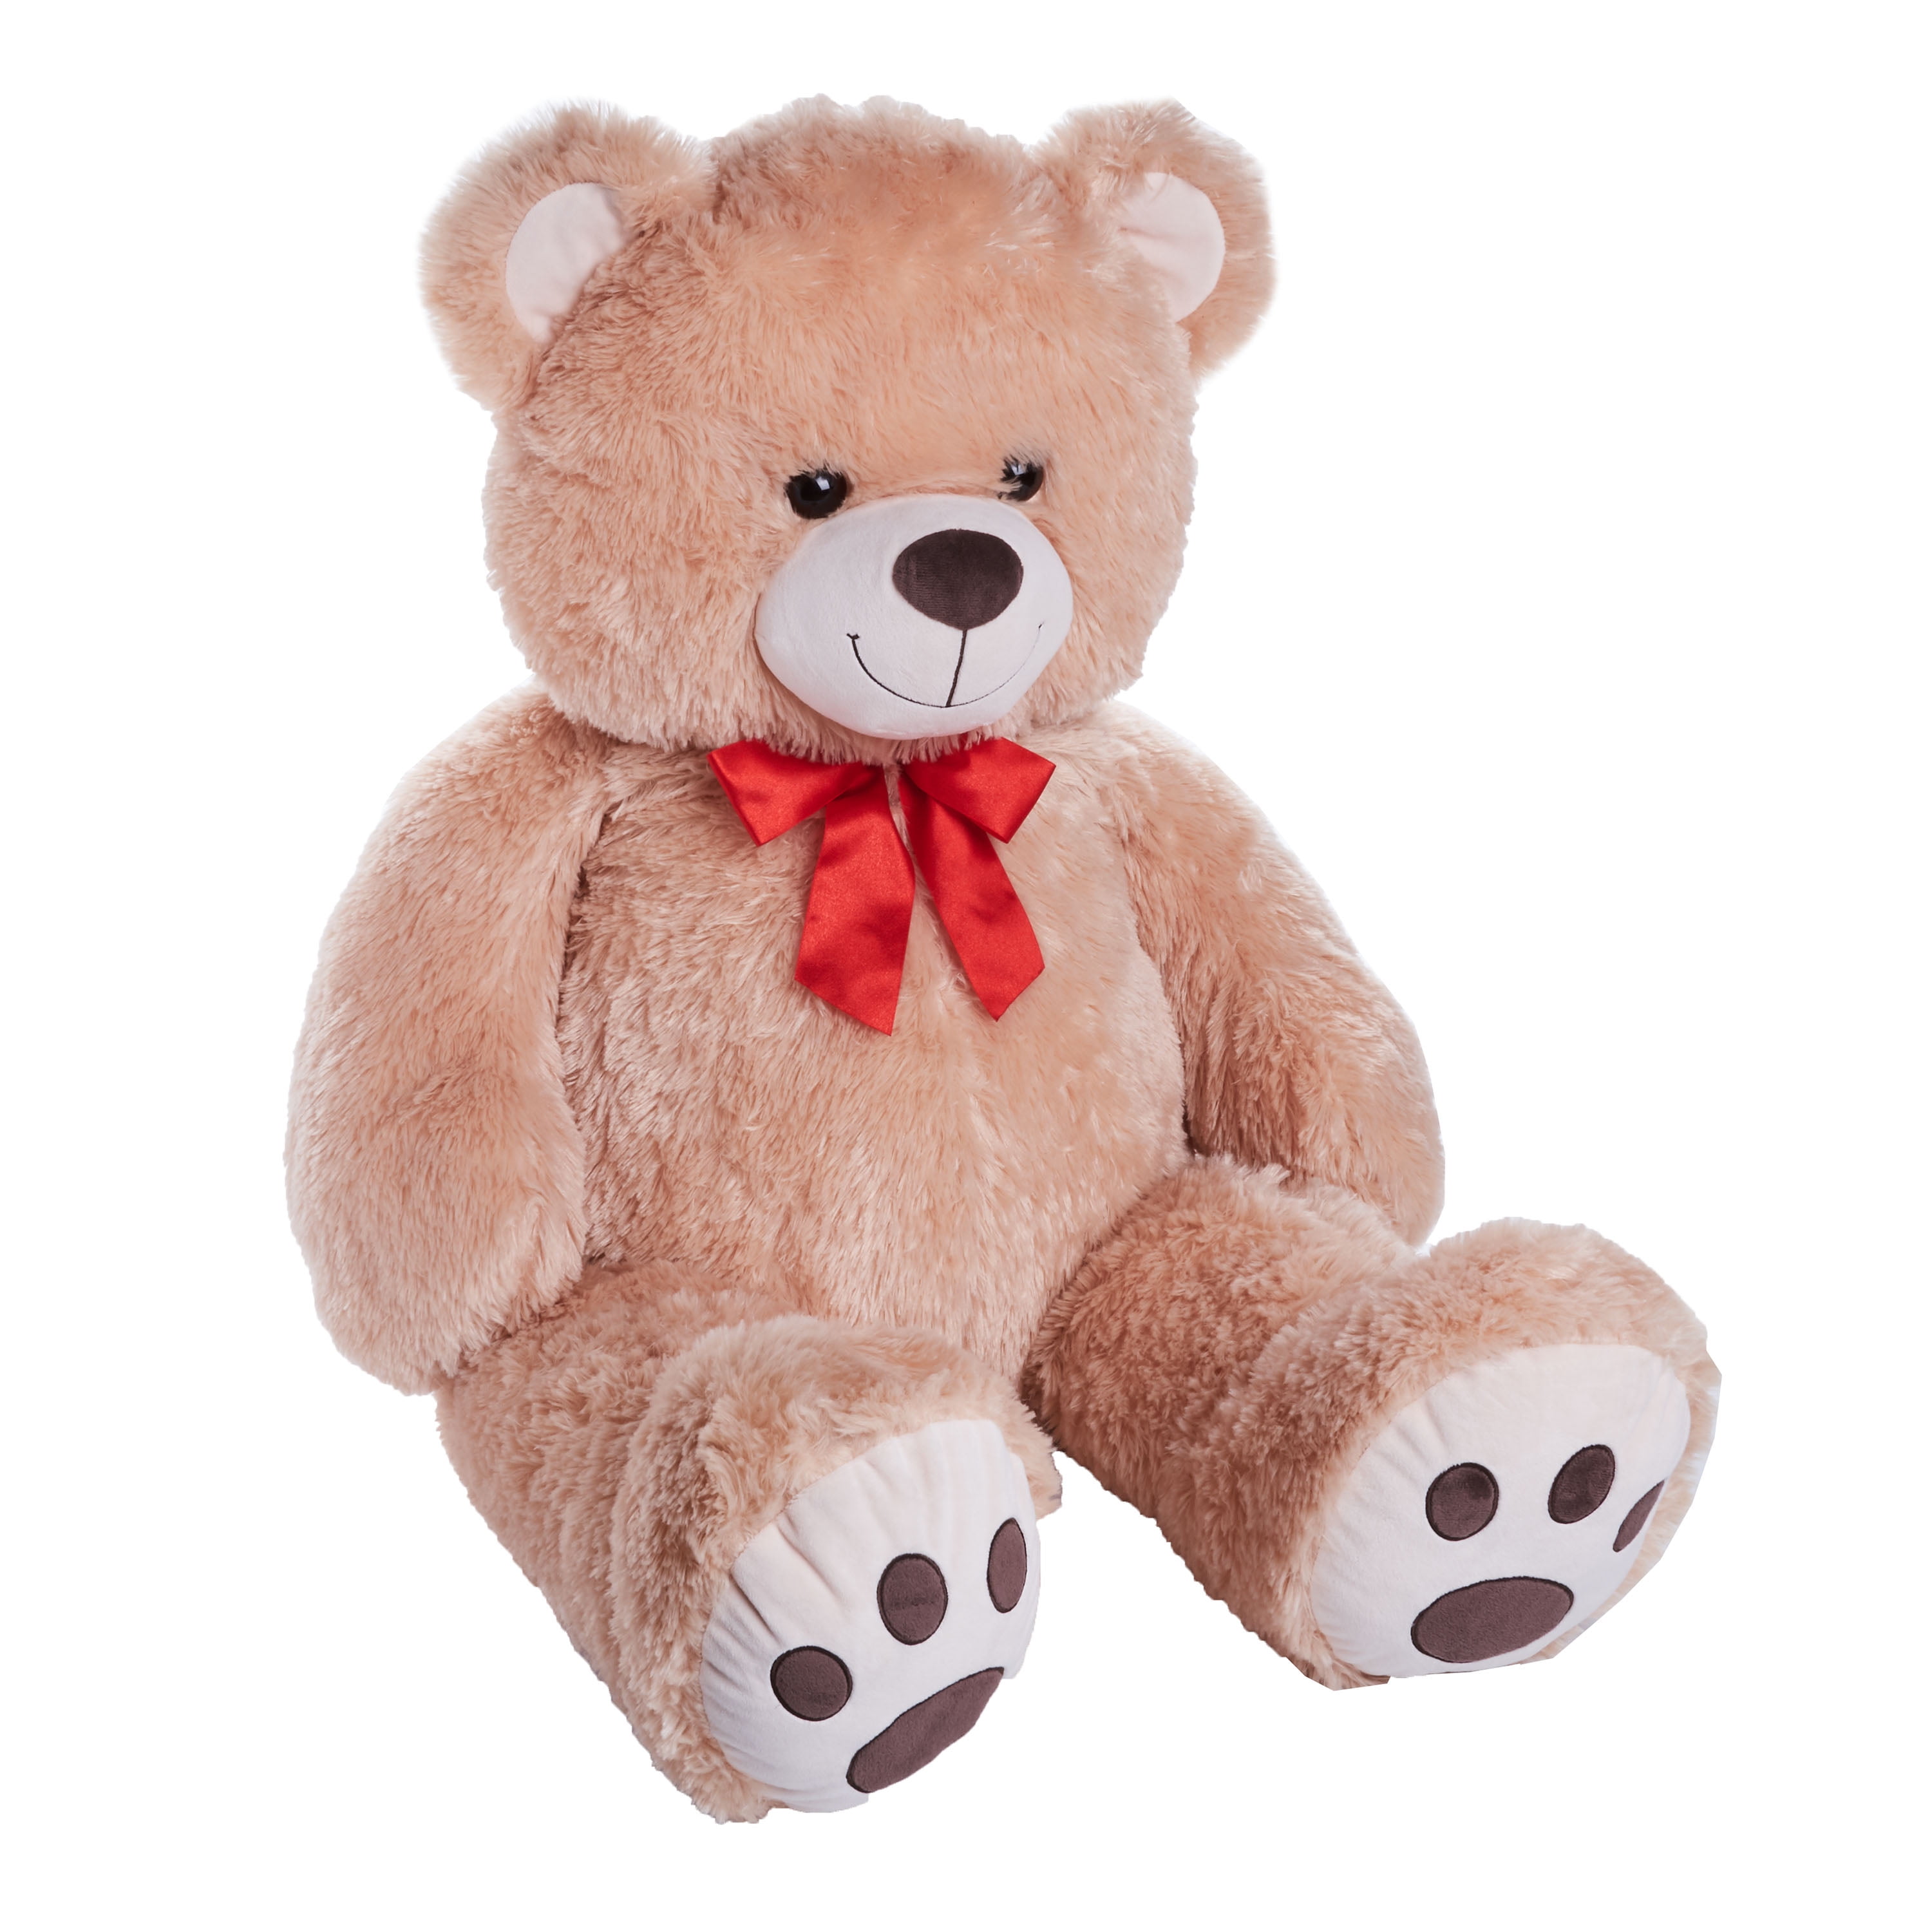 List 99+ Images pictures of a teddy bear Latest